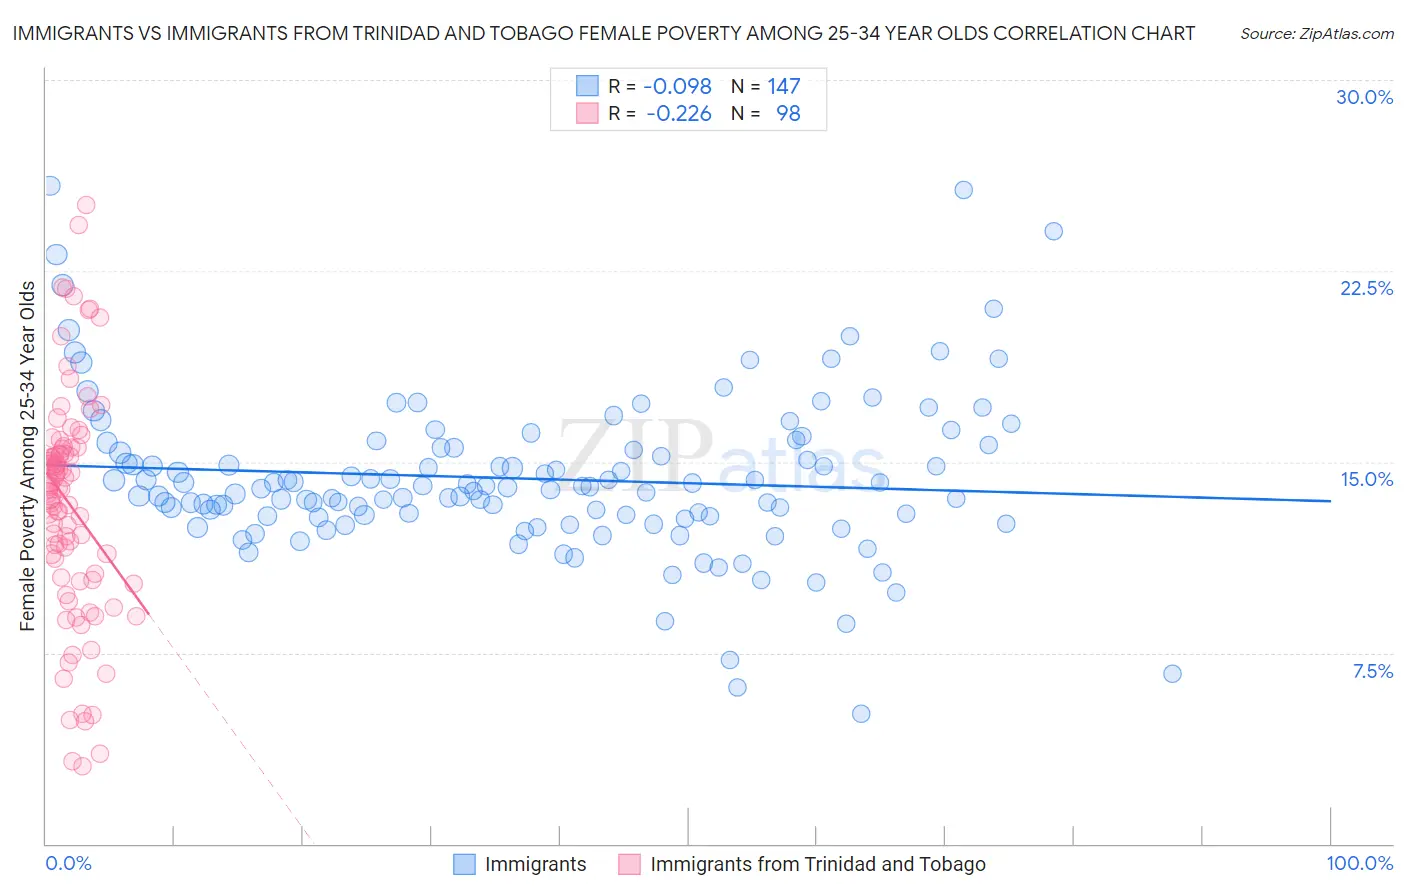 Immigrants vs Immigrants from Trinidad and Tobago Female Poverty Among 25-34 Year Olds